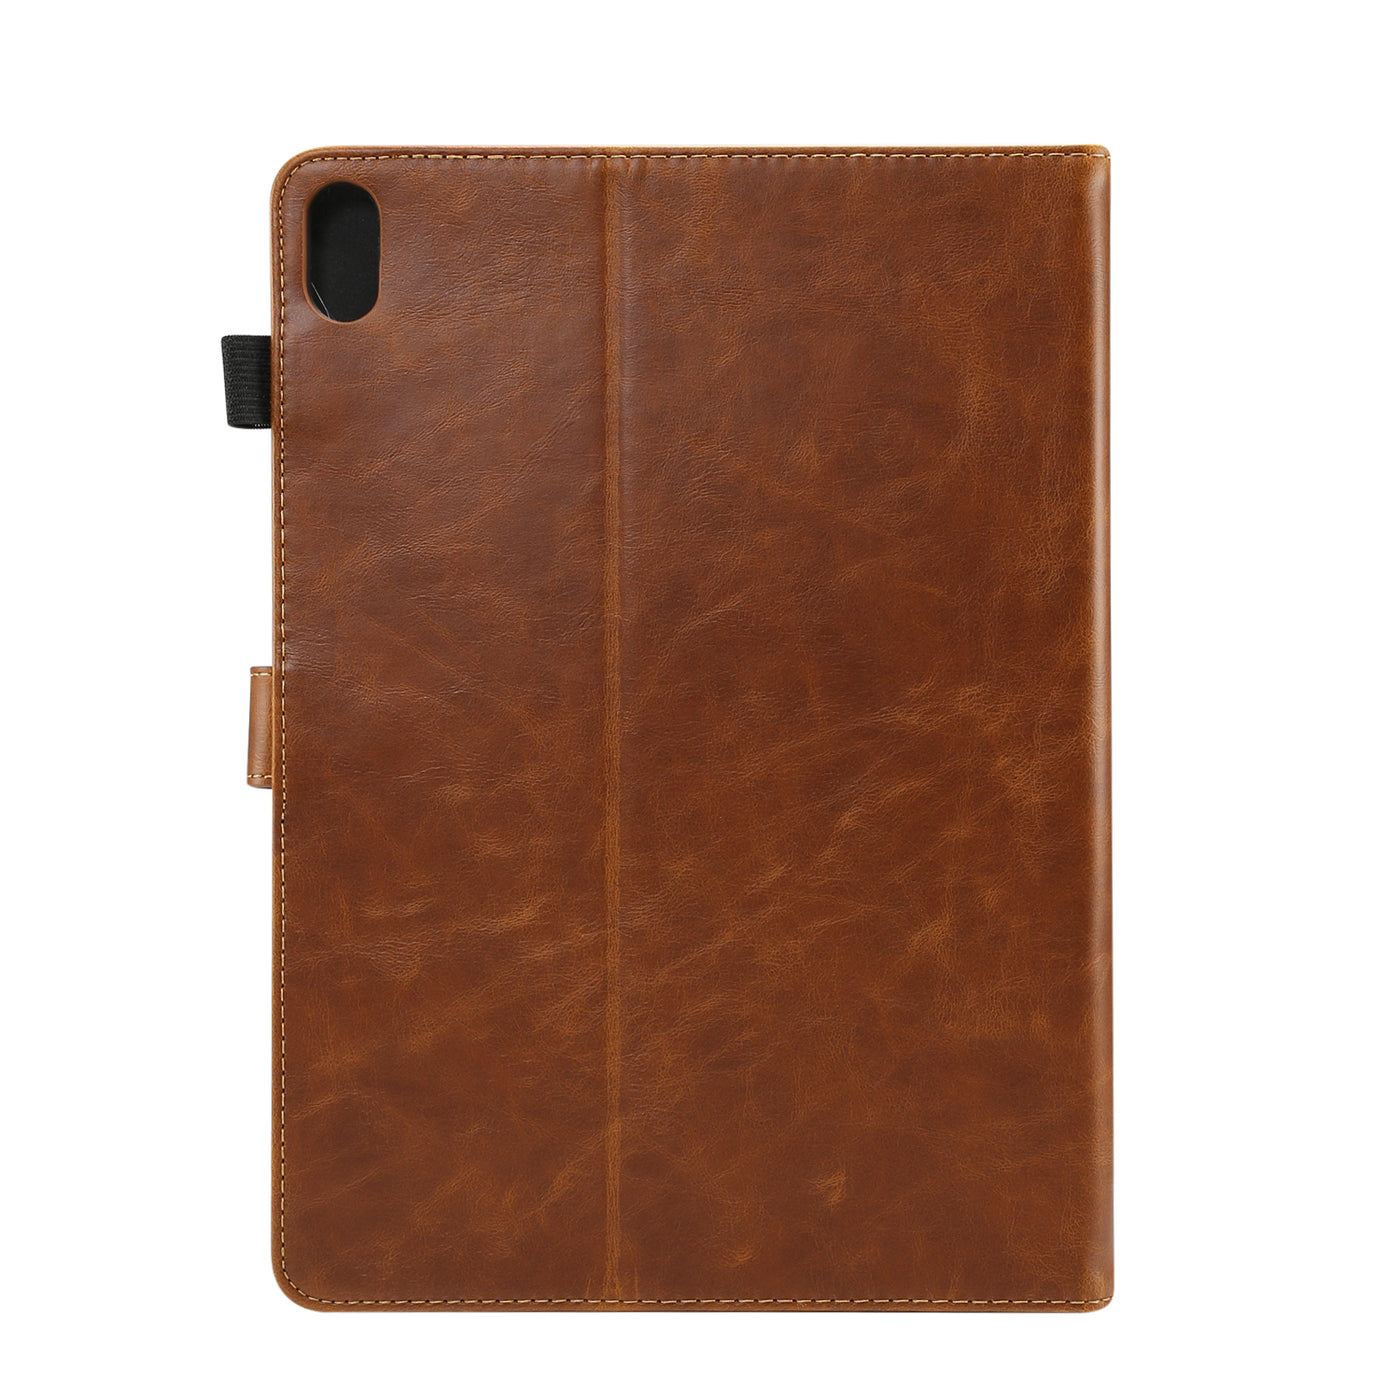 Excelsior Premium Leather Flip Cover Case For Apple iPad Air 10.9 inch (4th Gen)